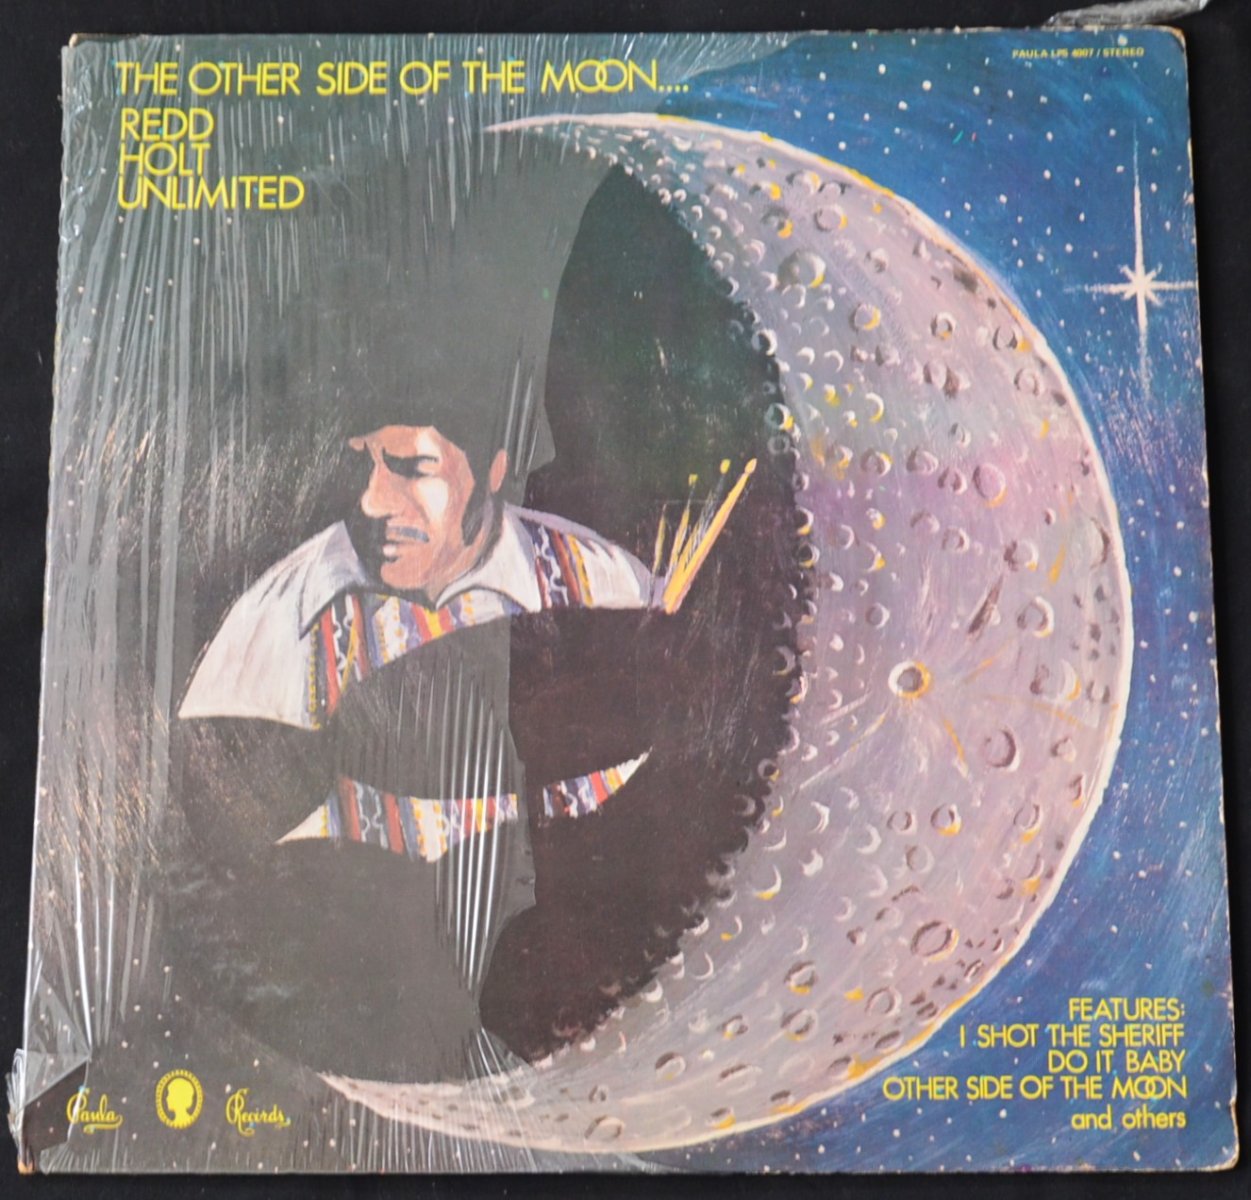 REDD HOLT UNLIMITED / THE OTHER SIDE OF THE MOON (LP)